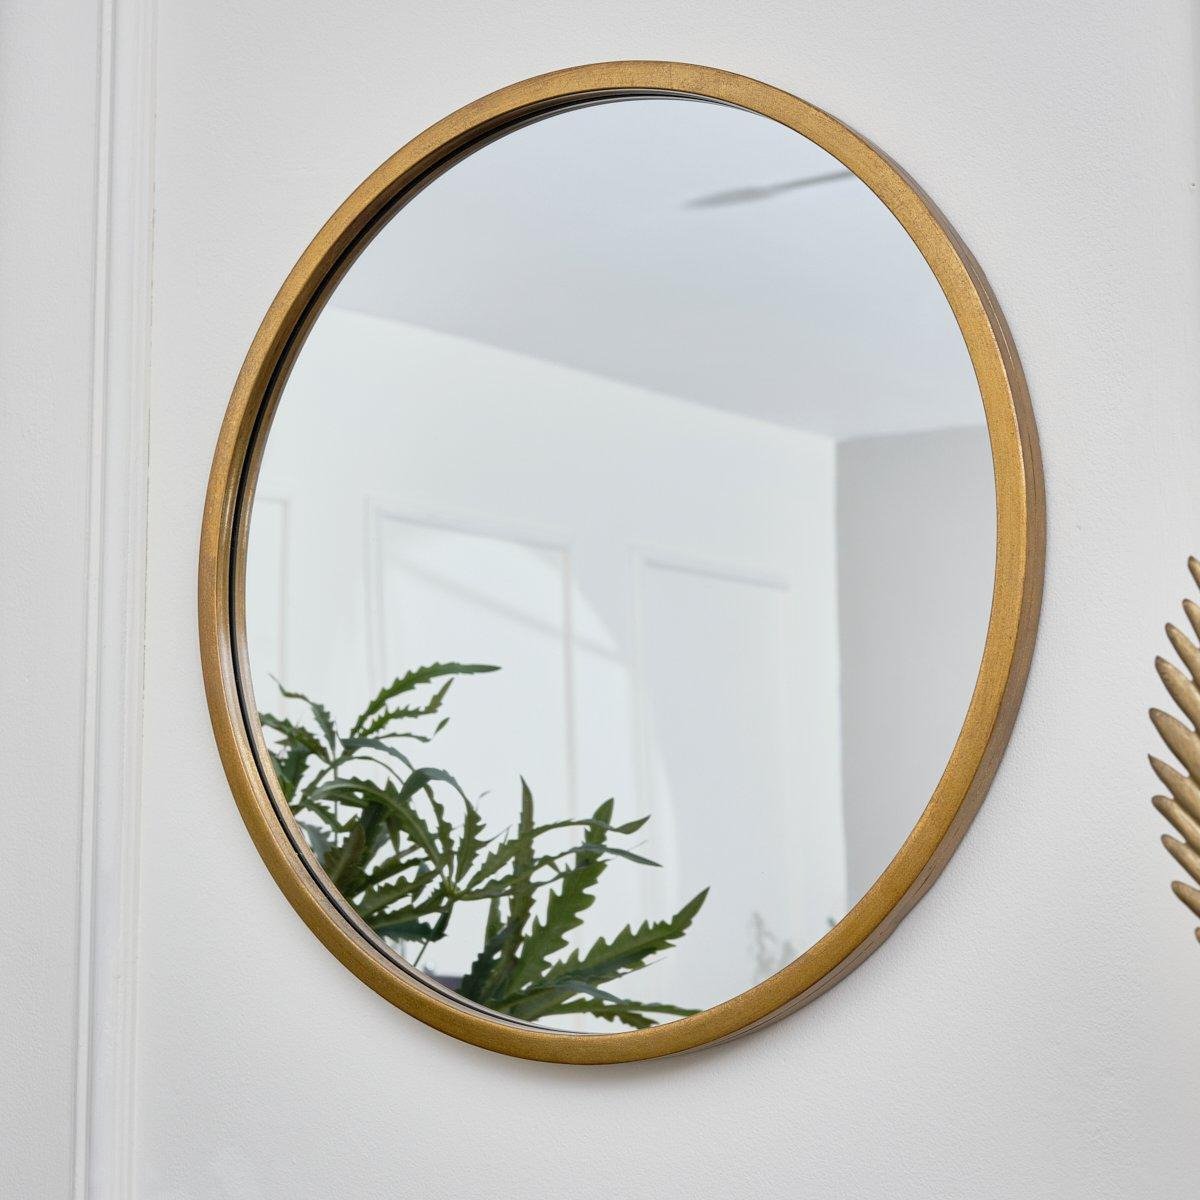 Large Round Gold Wall Mirror 50cm X 50cm - image 1